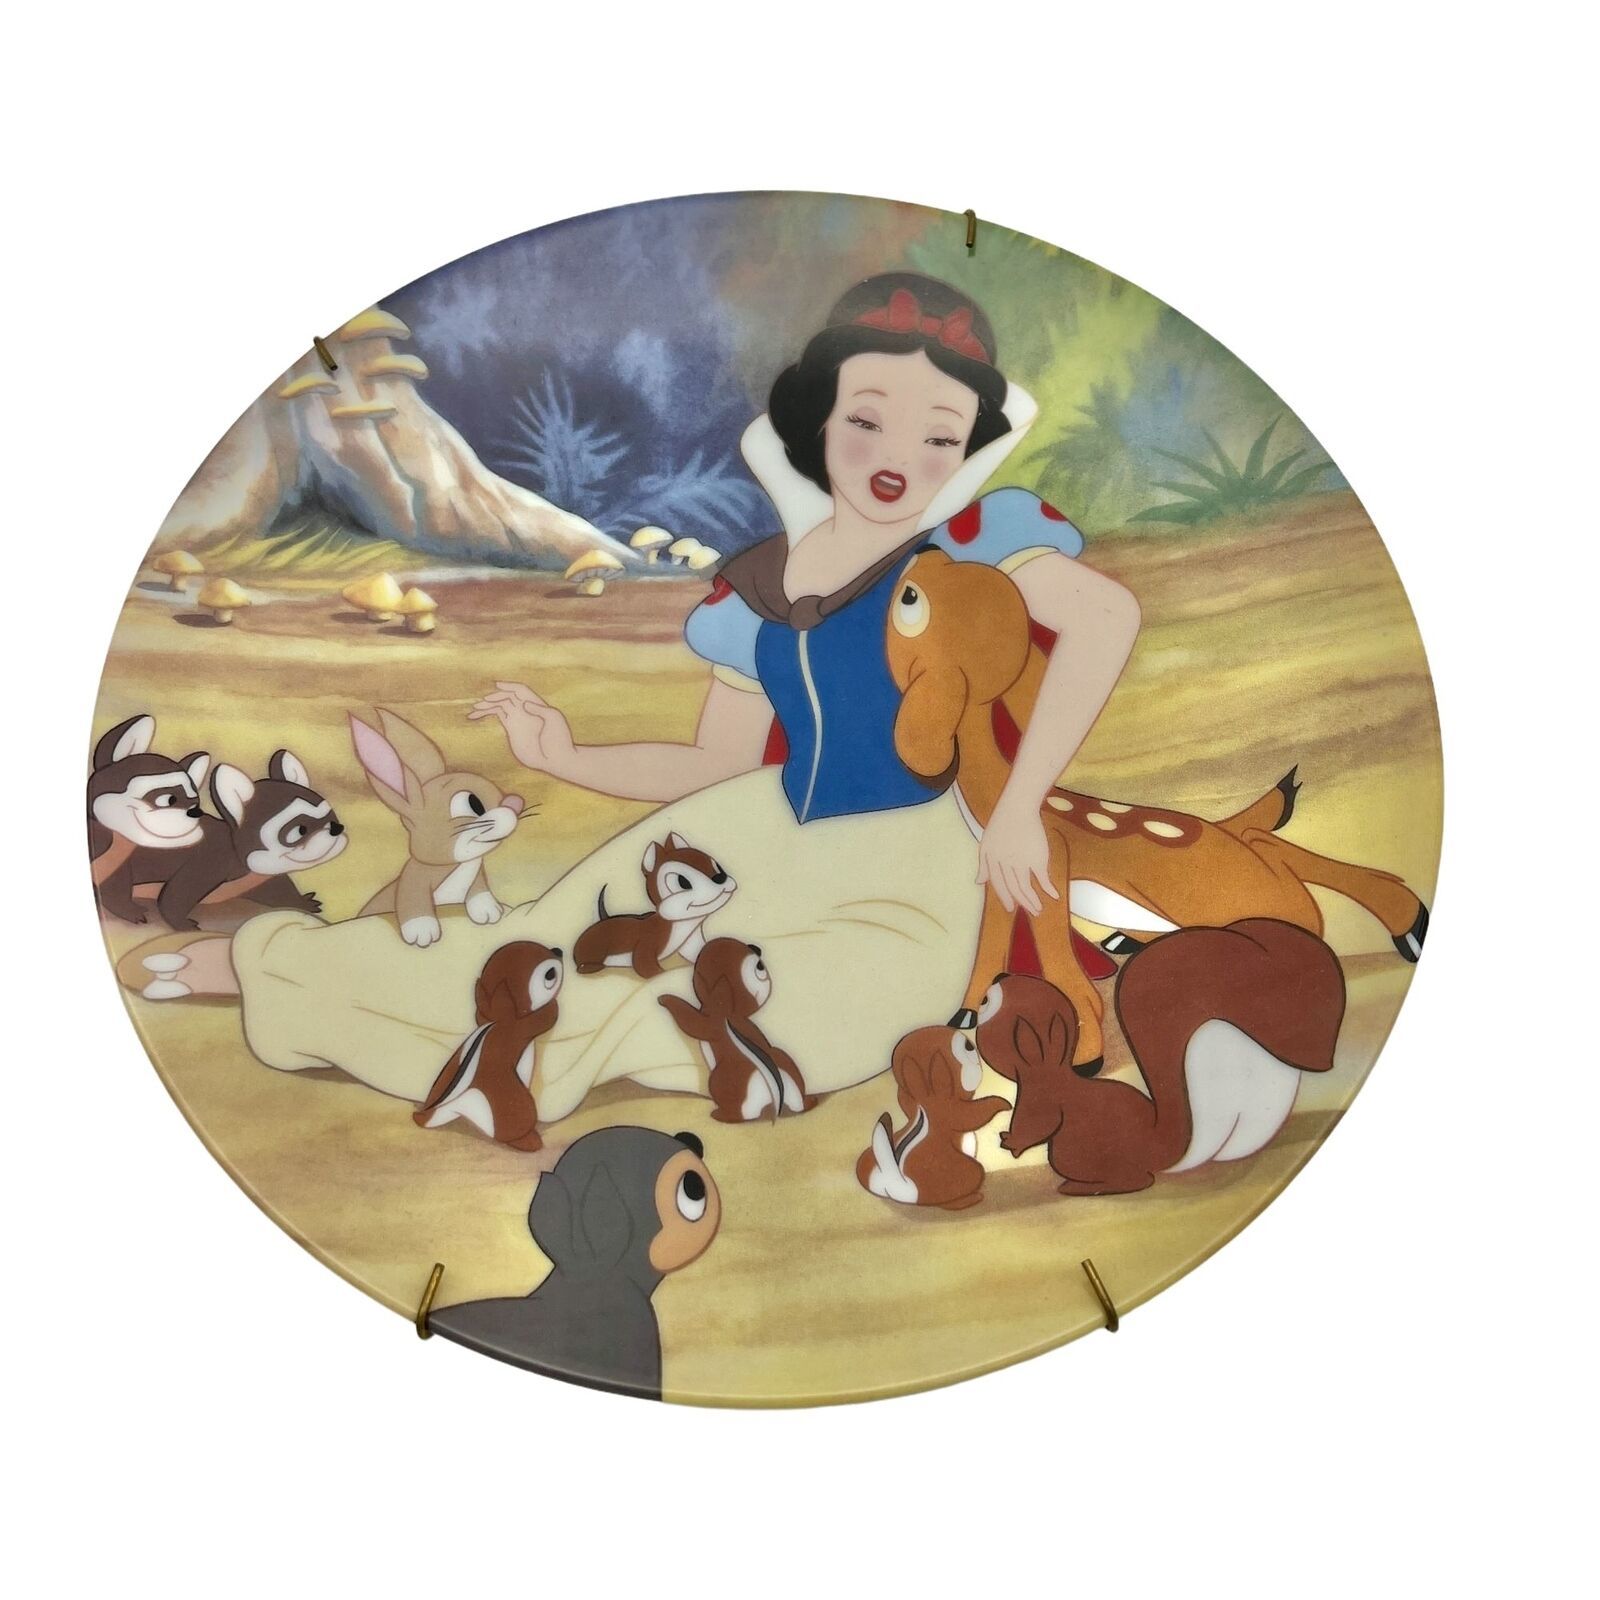 Primary image for Disney Edwin Knowles China Snow White Plate 5209C With A Song and A Smile 8.5 in